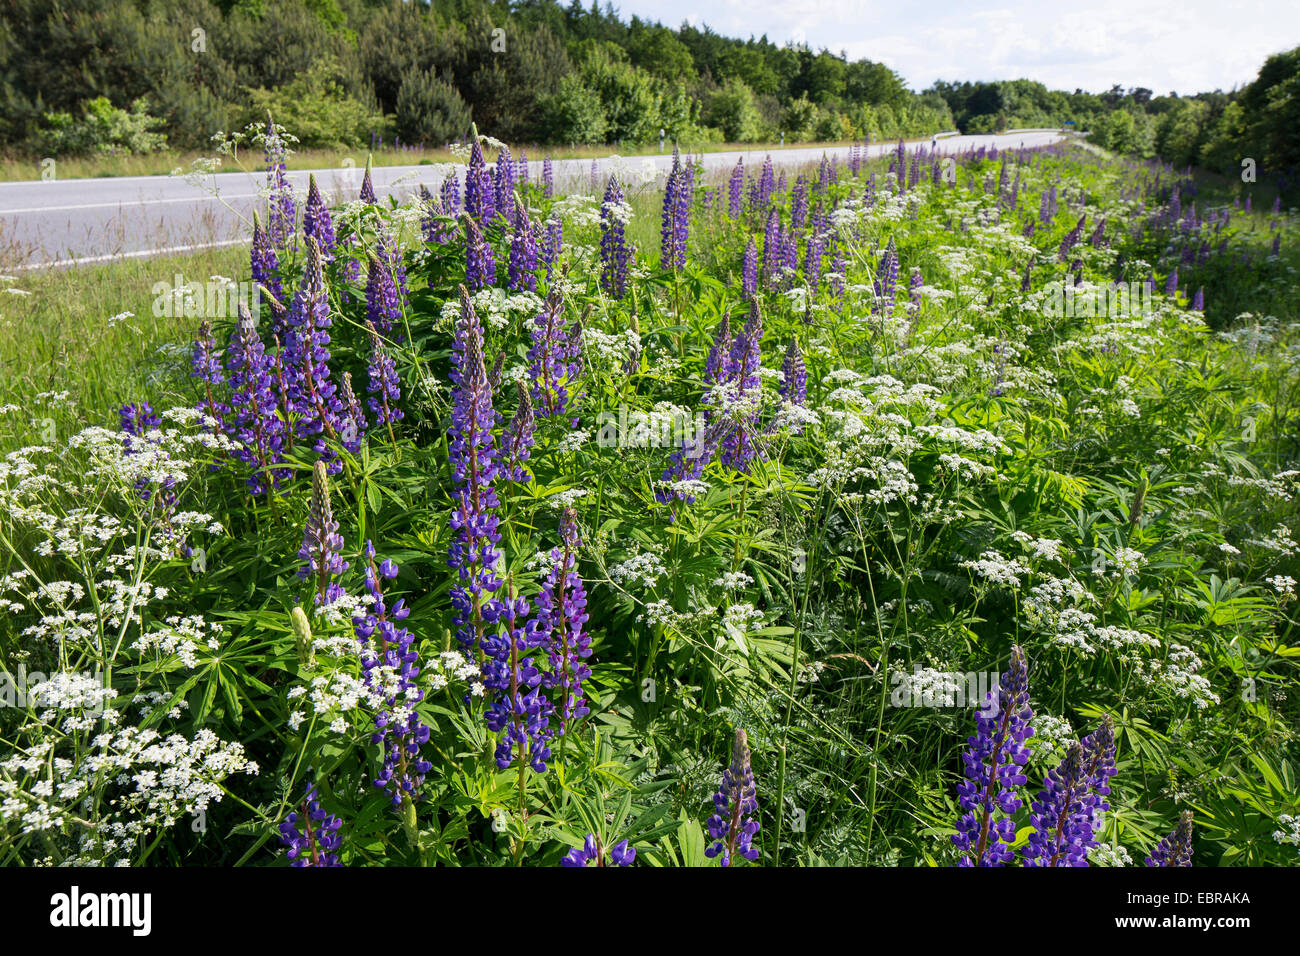 bigleaf lupine, many-leaved lupine, garden lupin (Lupinus polyphyllus), blooming at roadside, Germany Stock Photo